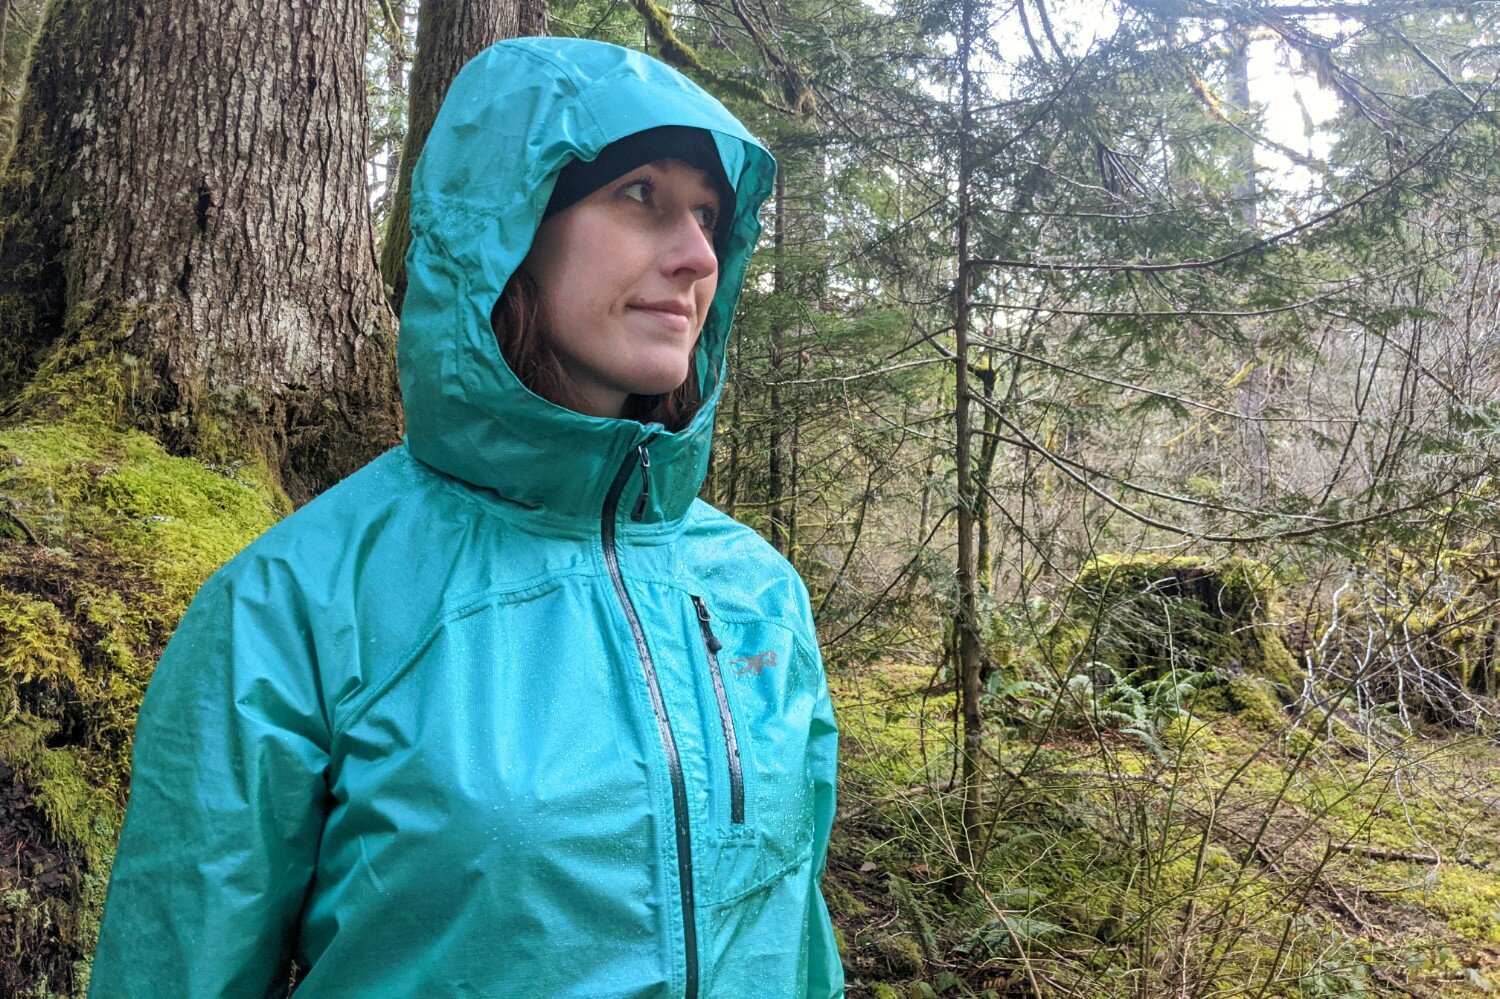 Helium Rainwear is pretty tough for how lightweight it is, but it has its limitations